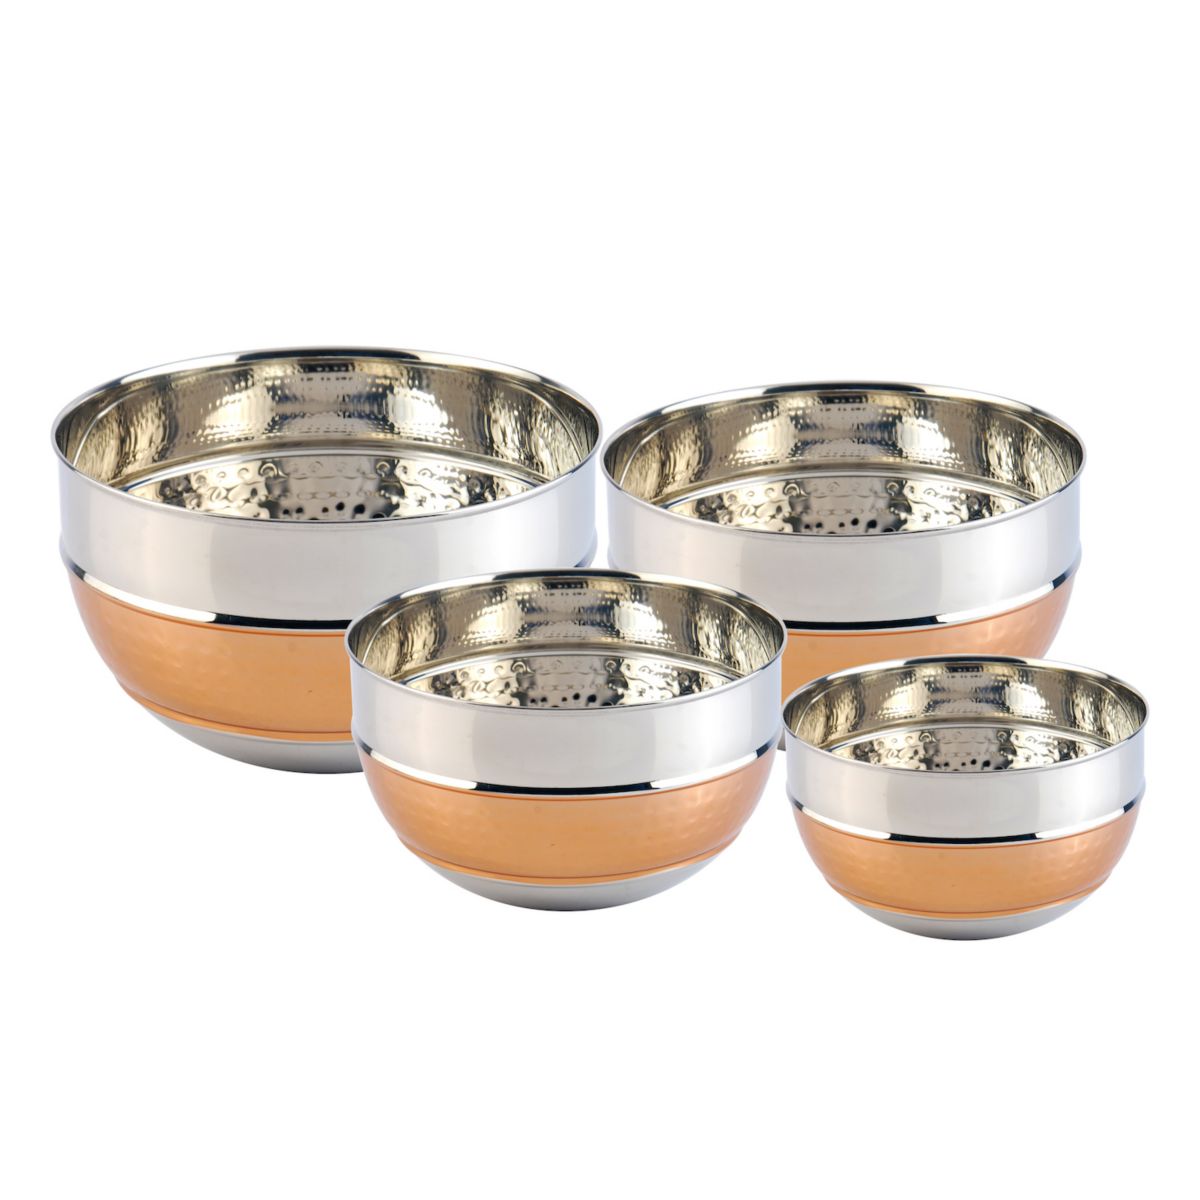 Four Piece Premium Two Tone Stainless Steel Hammered Mixing Bowls Lexi Home